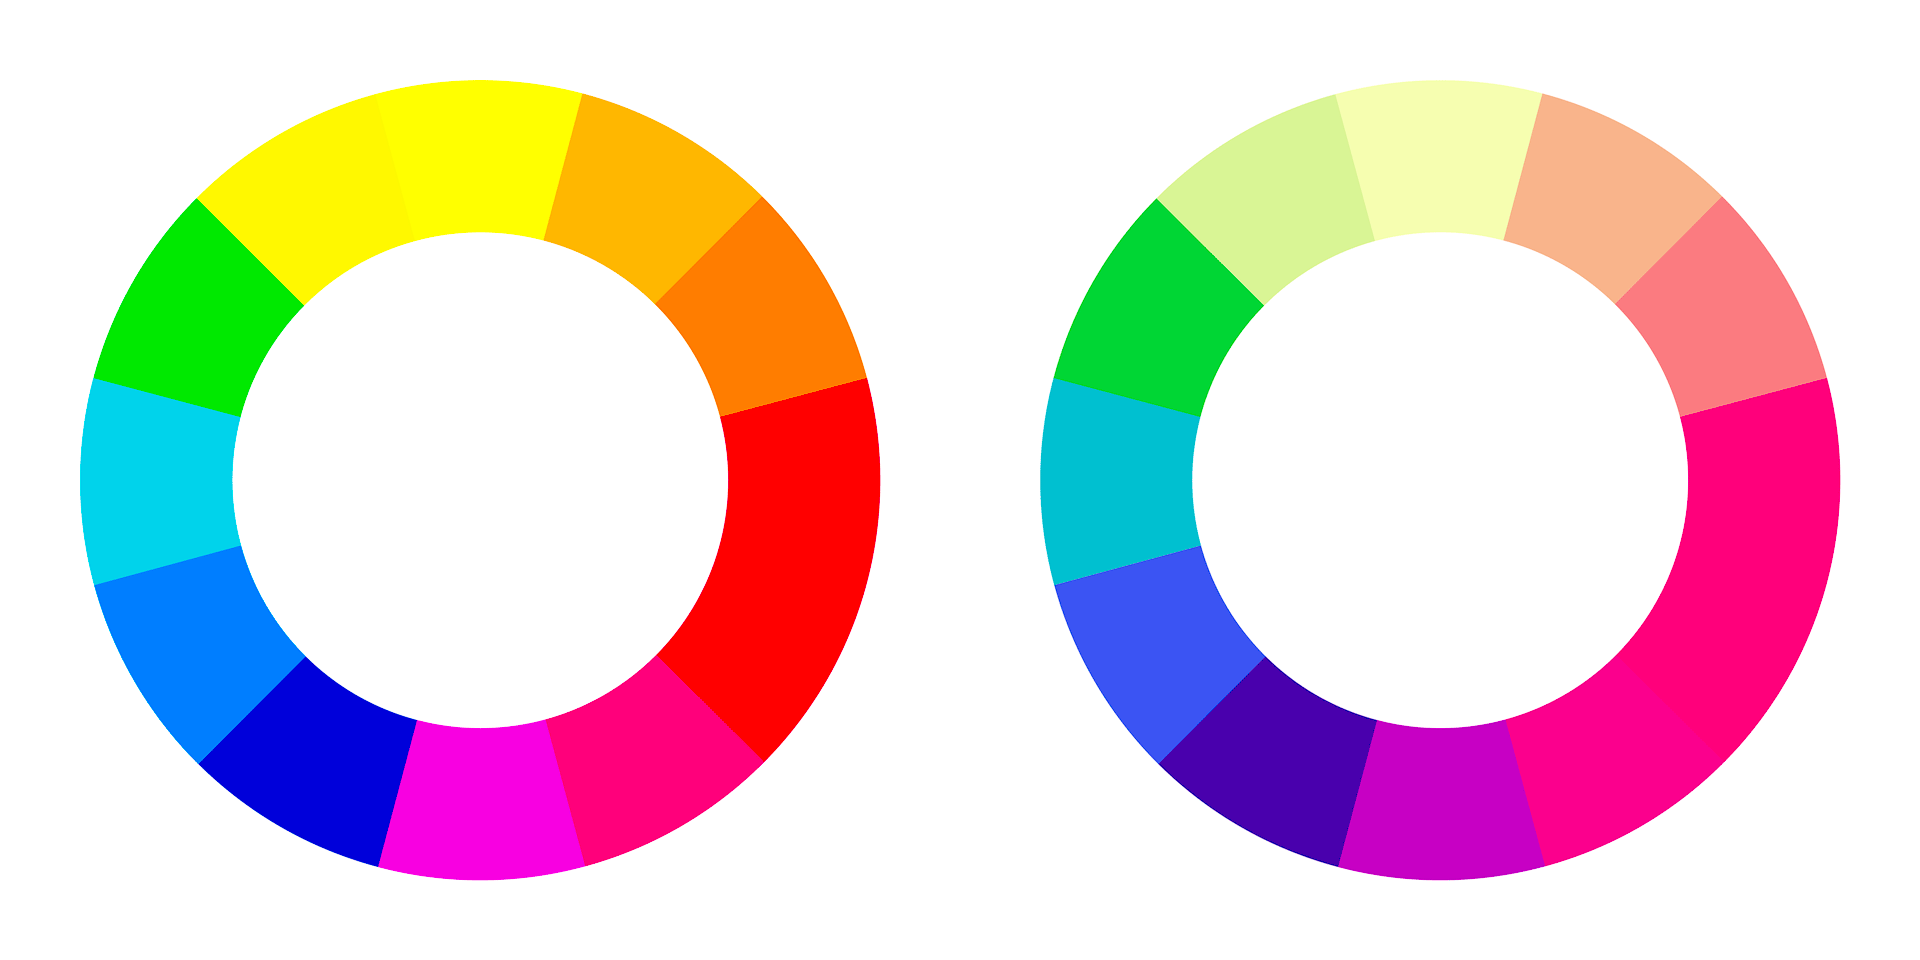 Correct color wheel (left), Calibration "Red" hue shift (right)